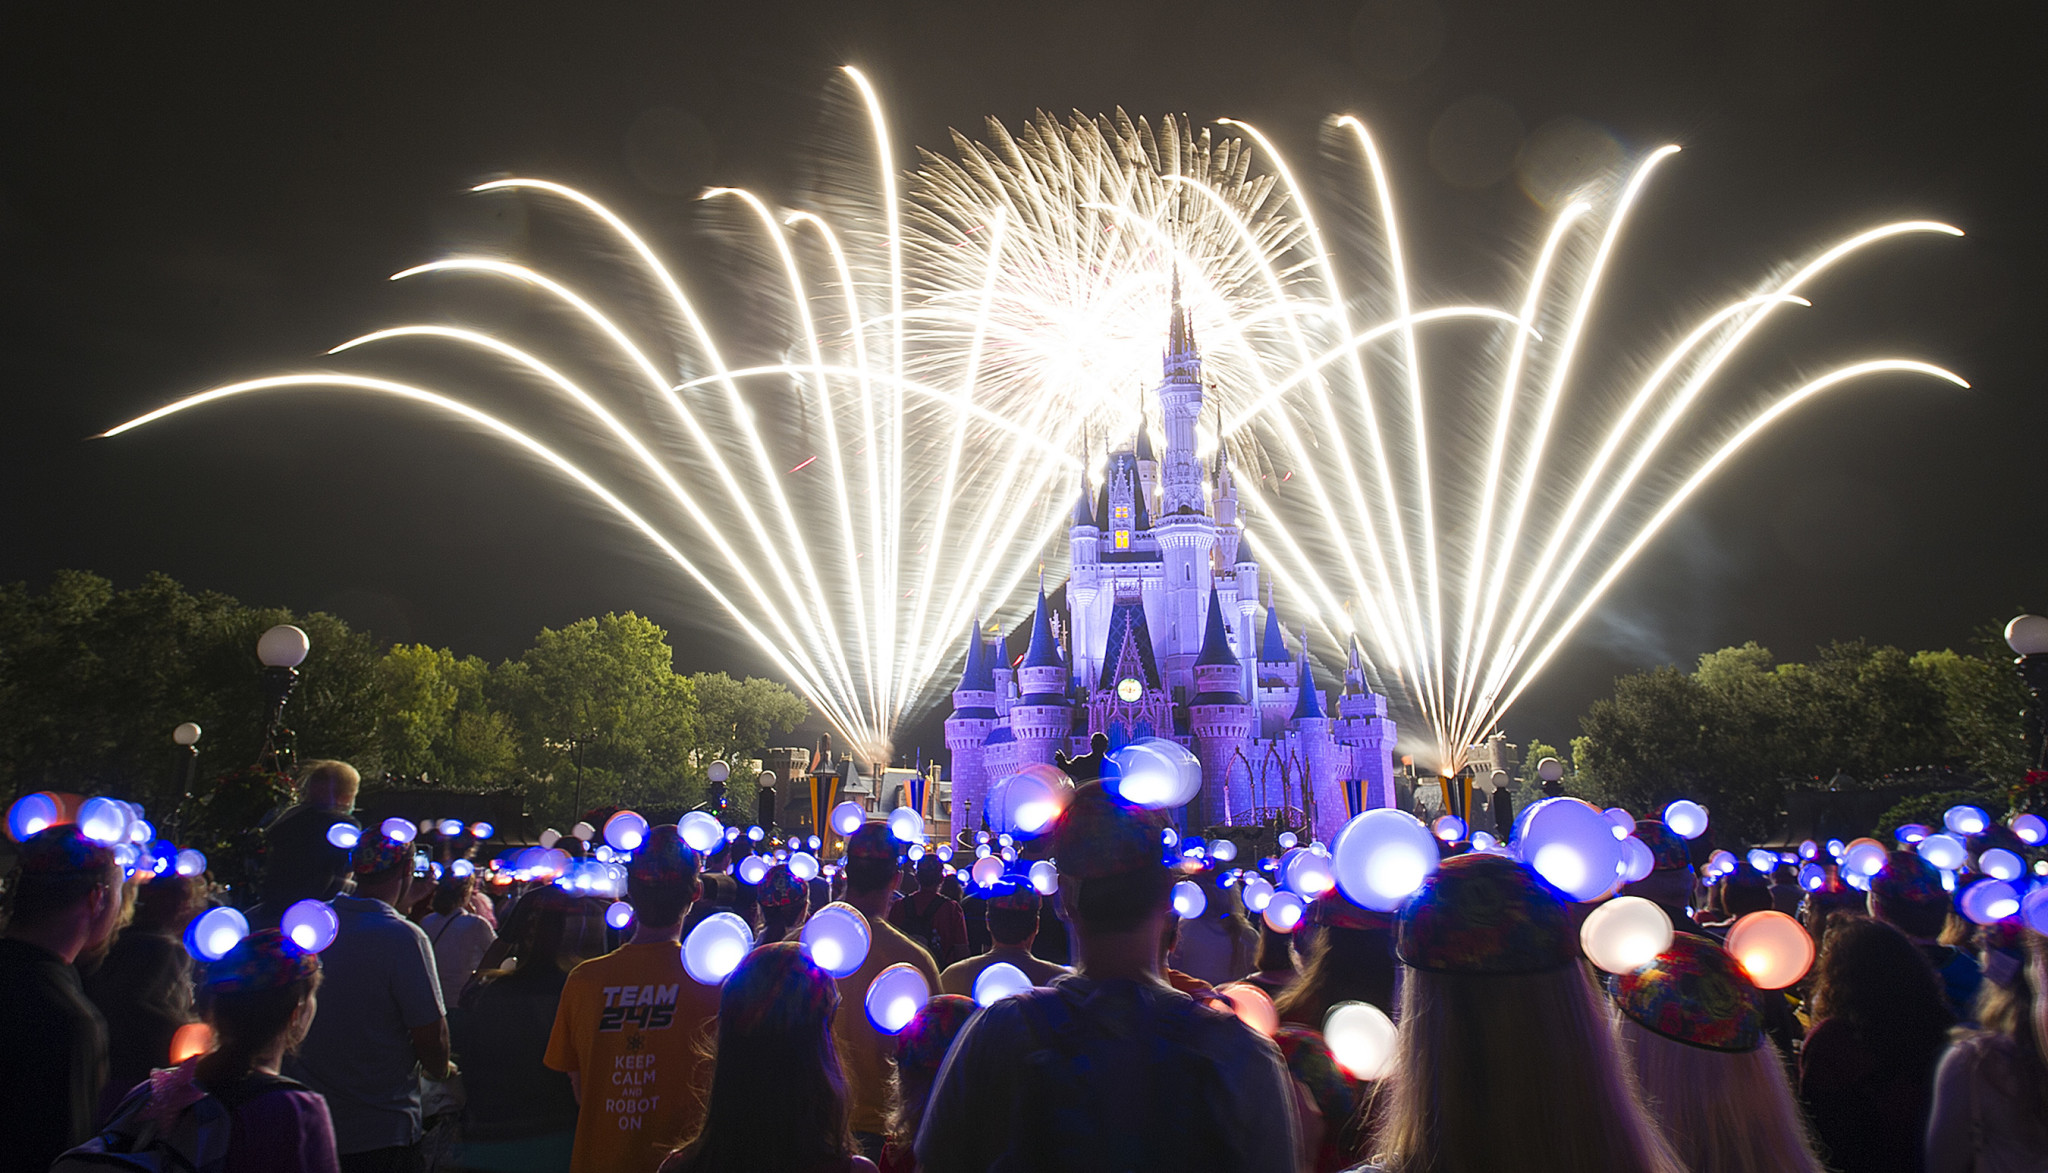 Don’t miss the New Year’s Eve Entertainment at Walt Disney World Resort